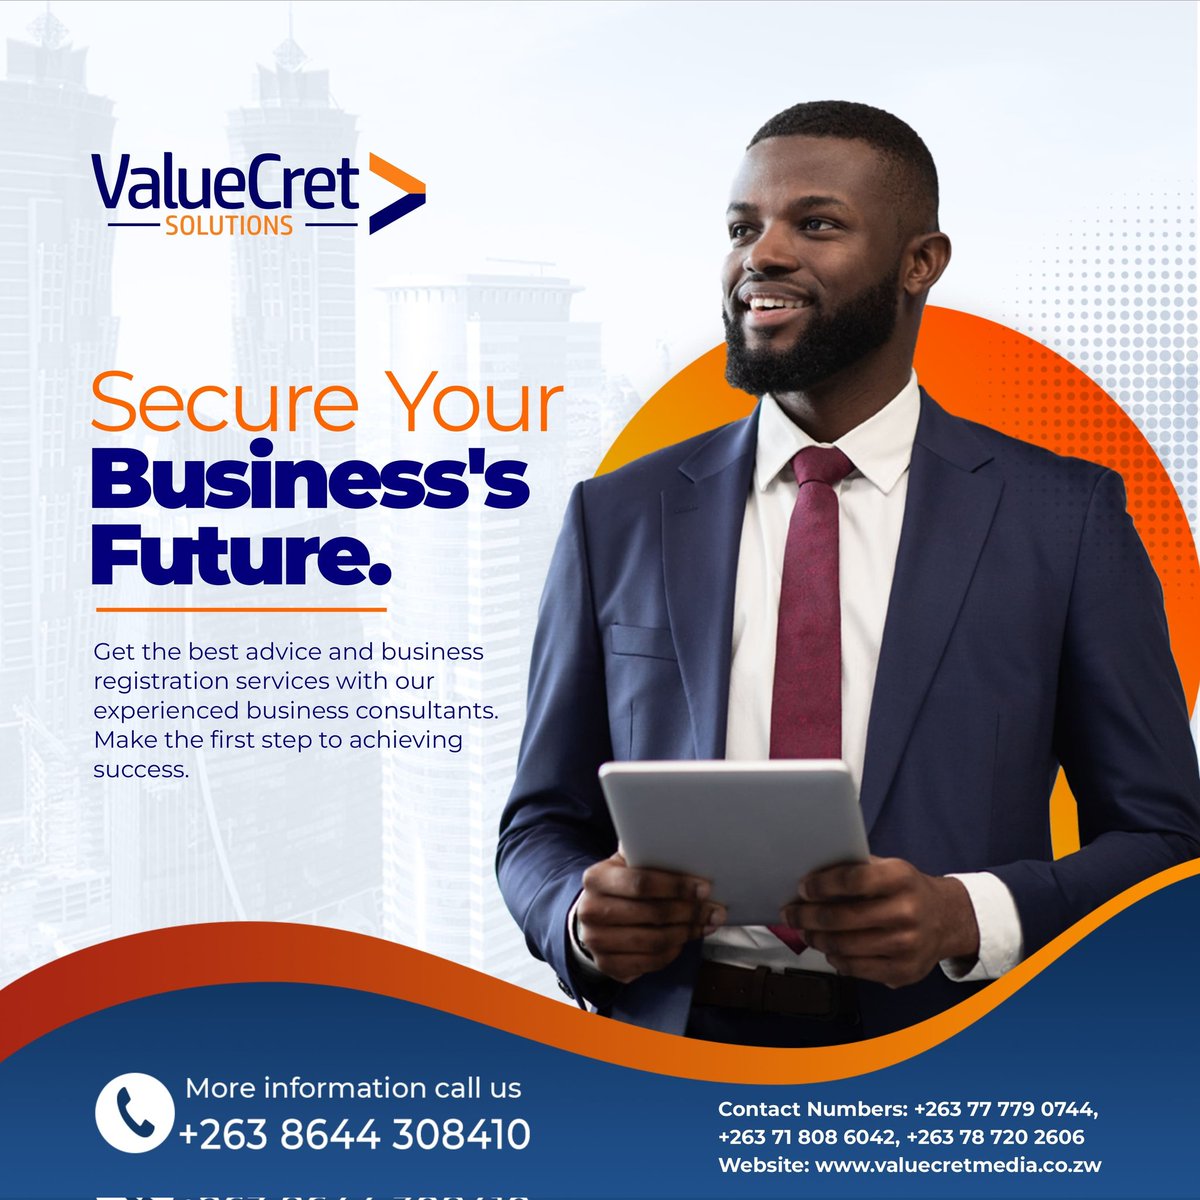 Are you looking for business advisory? We have the best service for you.

#MoreValue_MoreSolutions
#CompanyRegistration
#BusinessAdvisory
#BusinessConsultancy